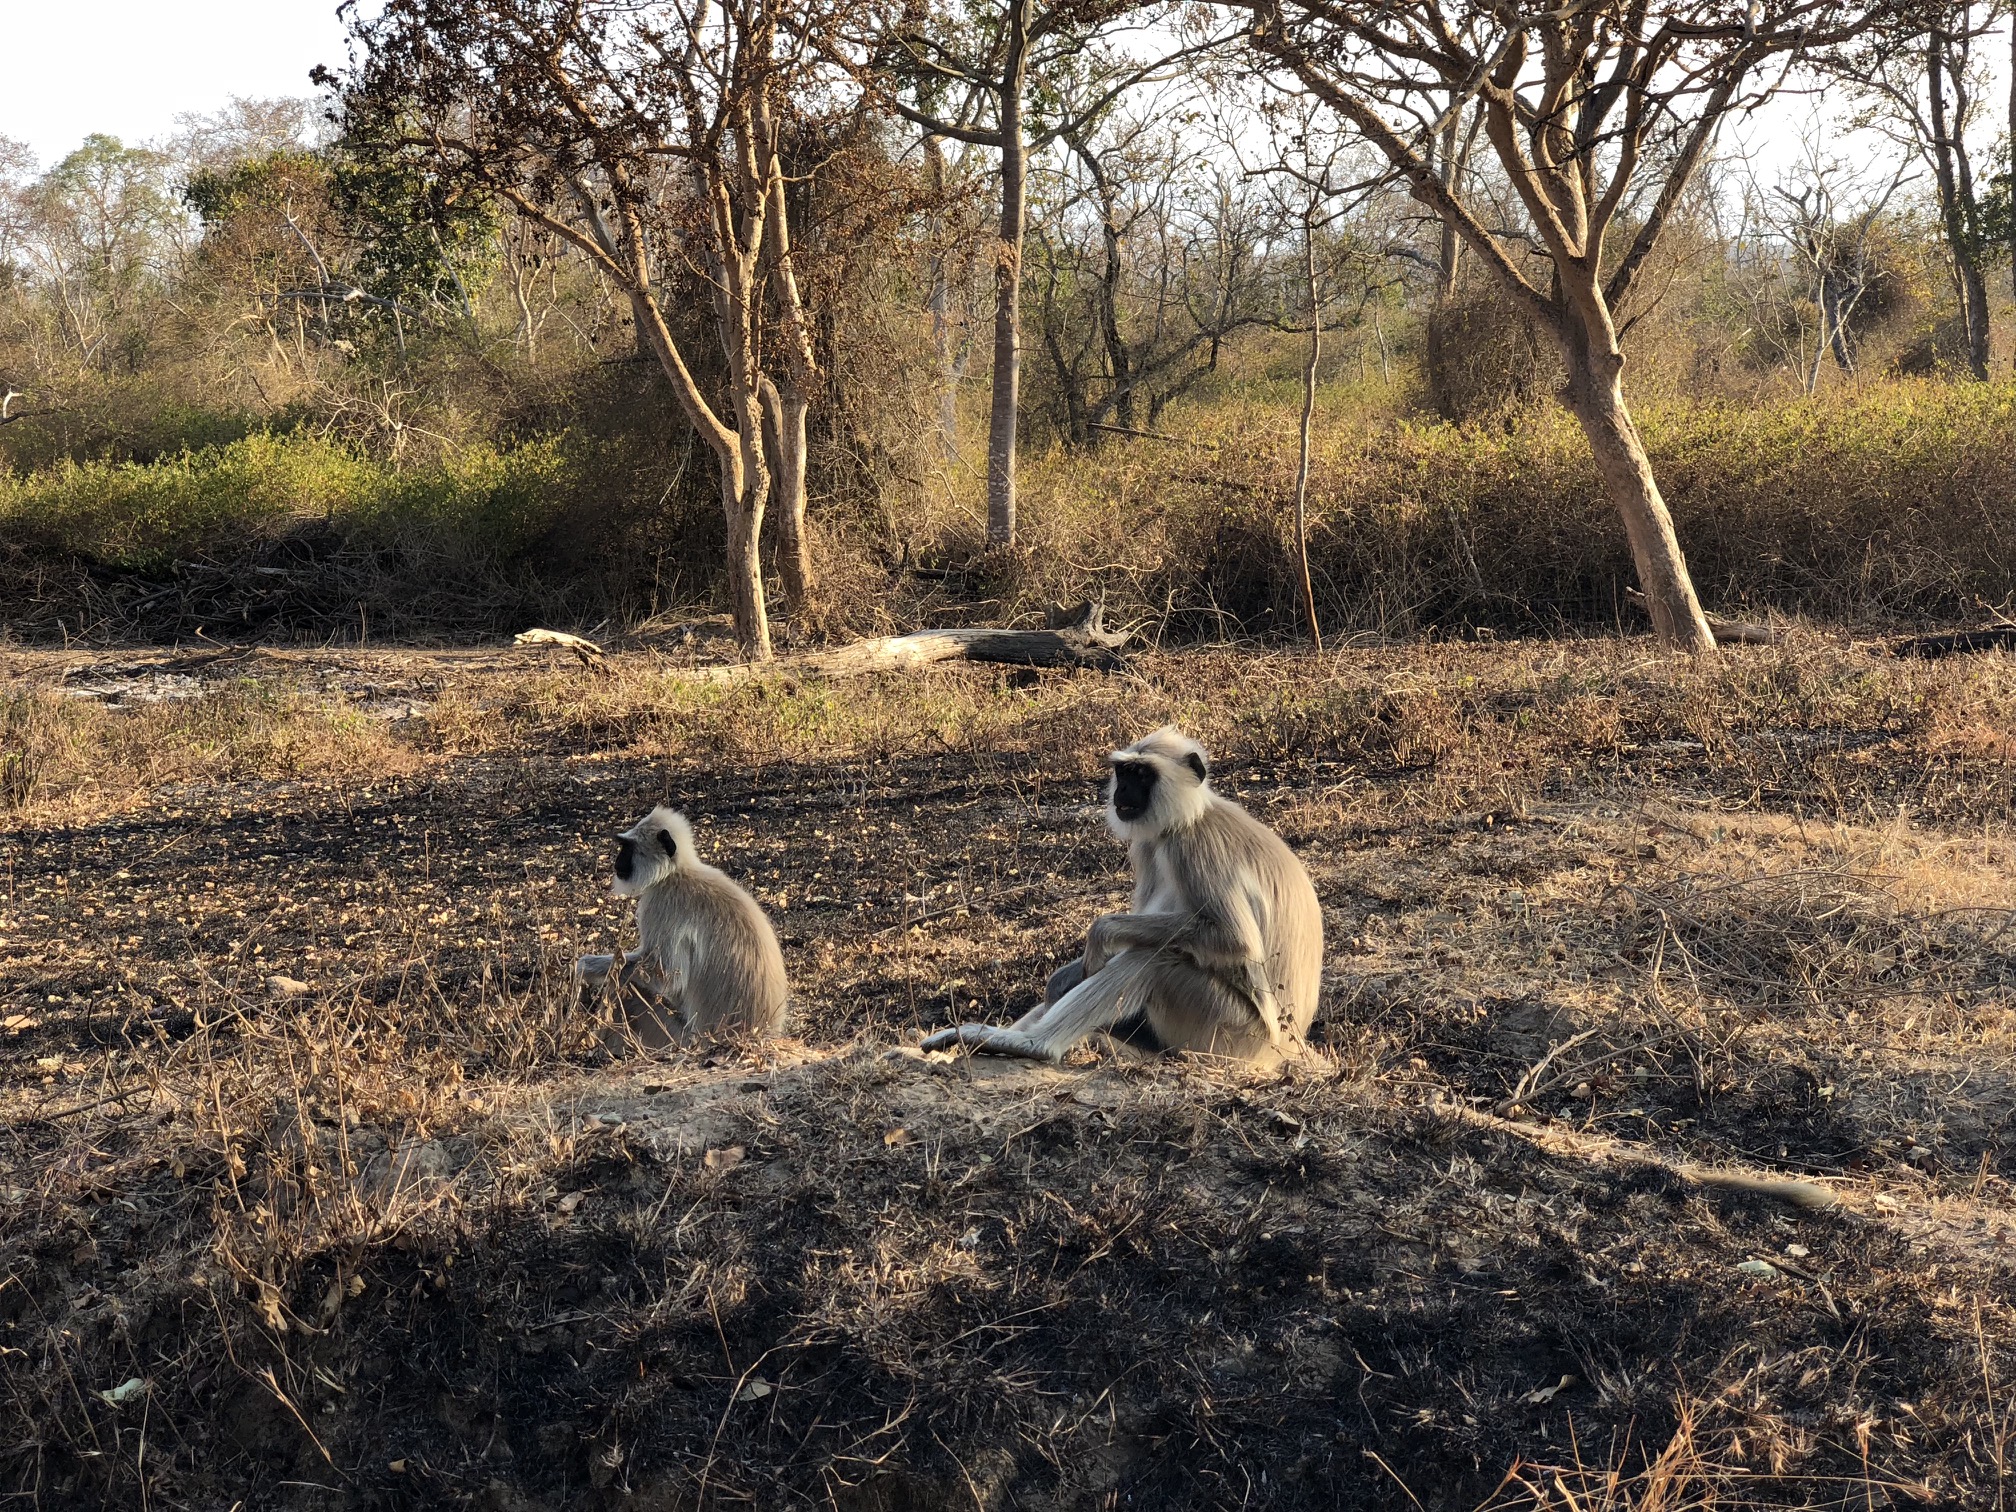 Two monkeys with brown and gray coats and dark black faces sit on a burned patch of ground.